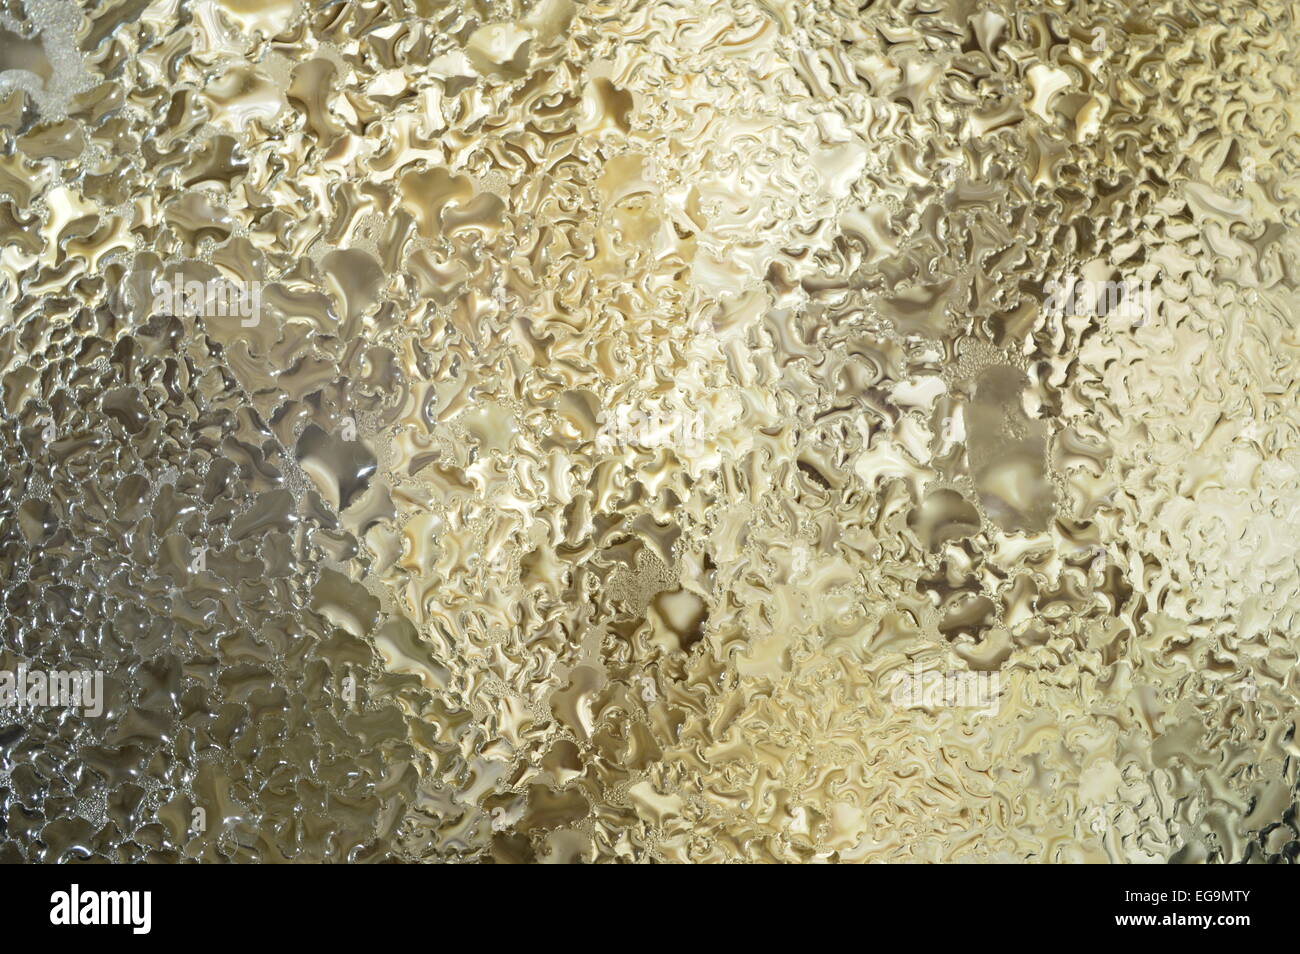 Abstract background. Golden drops of water on the glass material. Stock Photo